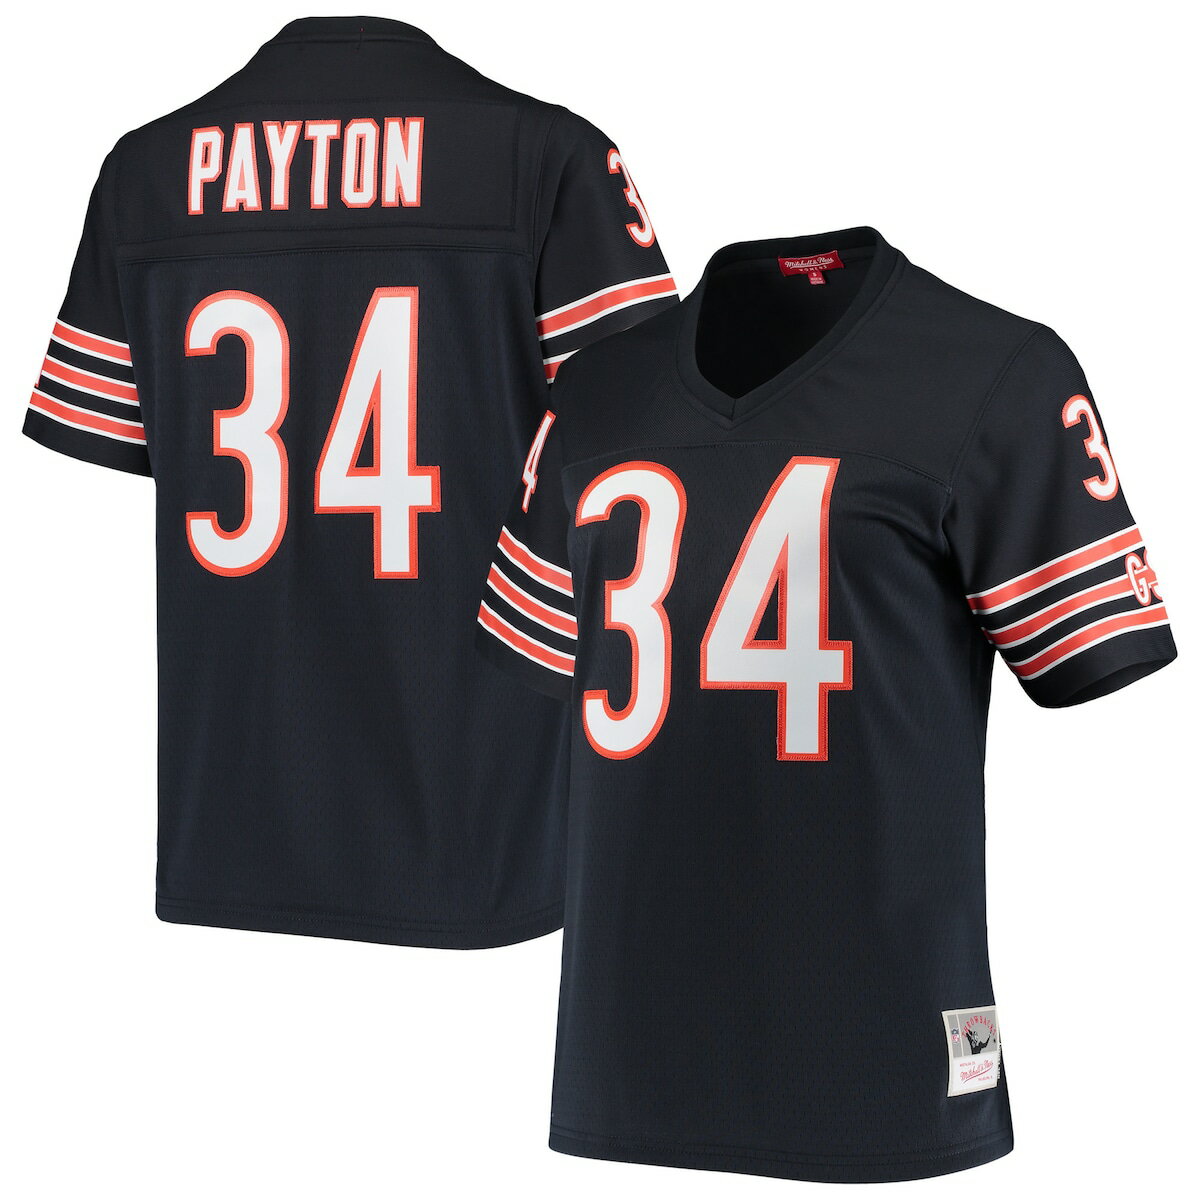 You're a massive Chicago Bears fan and love to flaunt it. Now you can show off your fandom when you get this Walter Payton Legacy replica jersey from Mitchell & Ness. It features distinctive throwback graphics on the chest and back, perfect for wearing on game day. By wearing this jersey, you'll be able to feel like you're reliving some of the great plays that Walter Payton accomplished to lead the Chicago Bears to glory.Woven jock tagReplica Throwback JerseyMaterial: 100% PolyesterMachine wash, line dryShort sleeveV-neckImportedBrand: Mitchell & NessOfficially licensedEmbroidered fabric applique